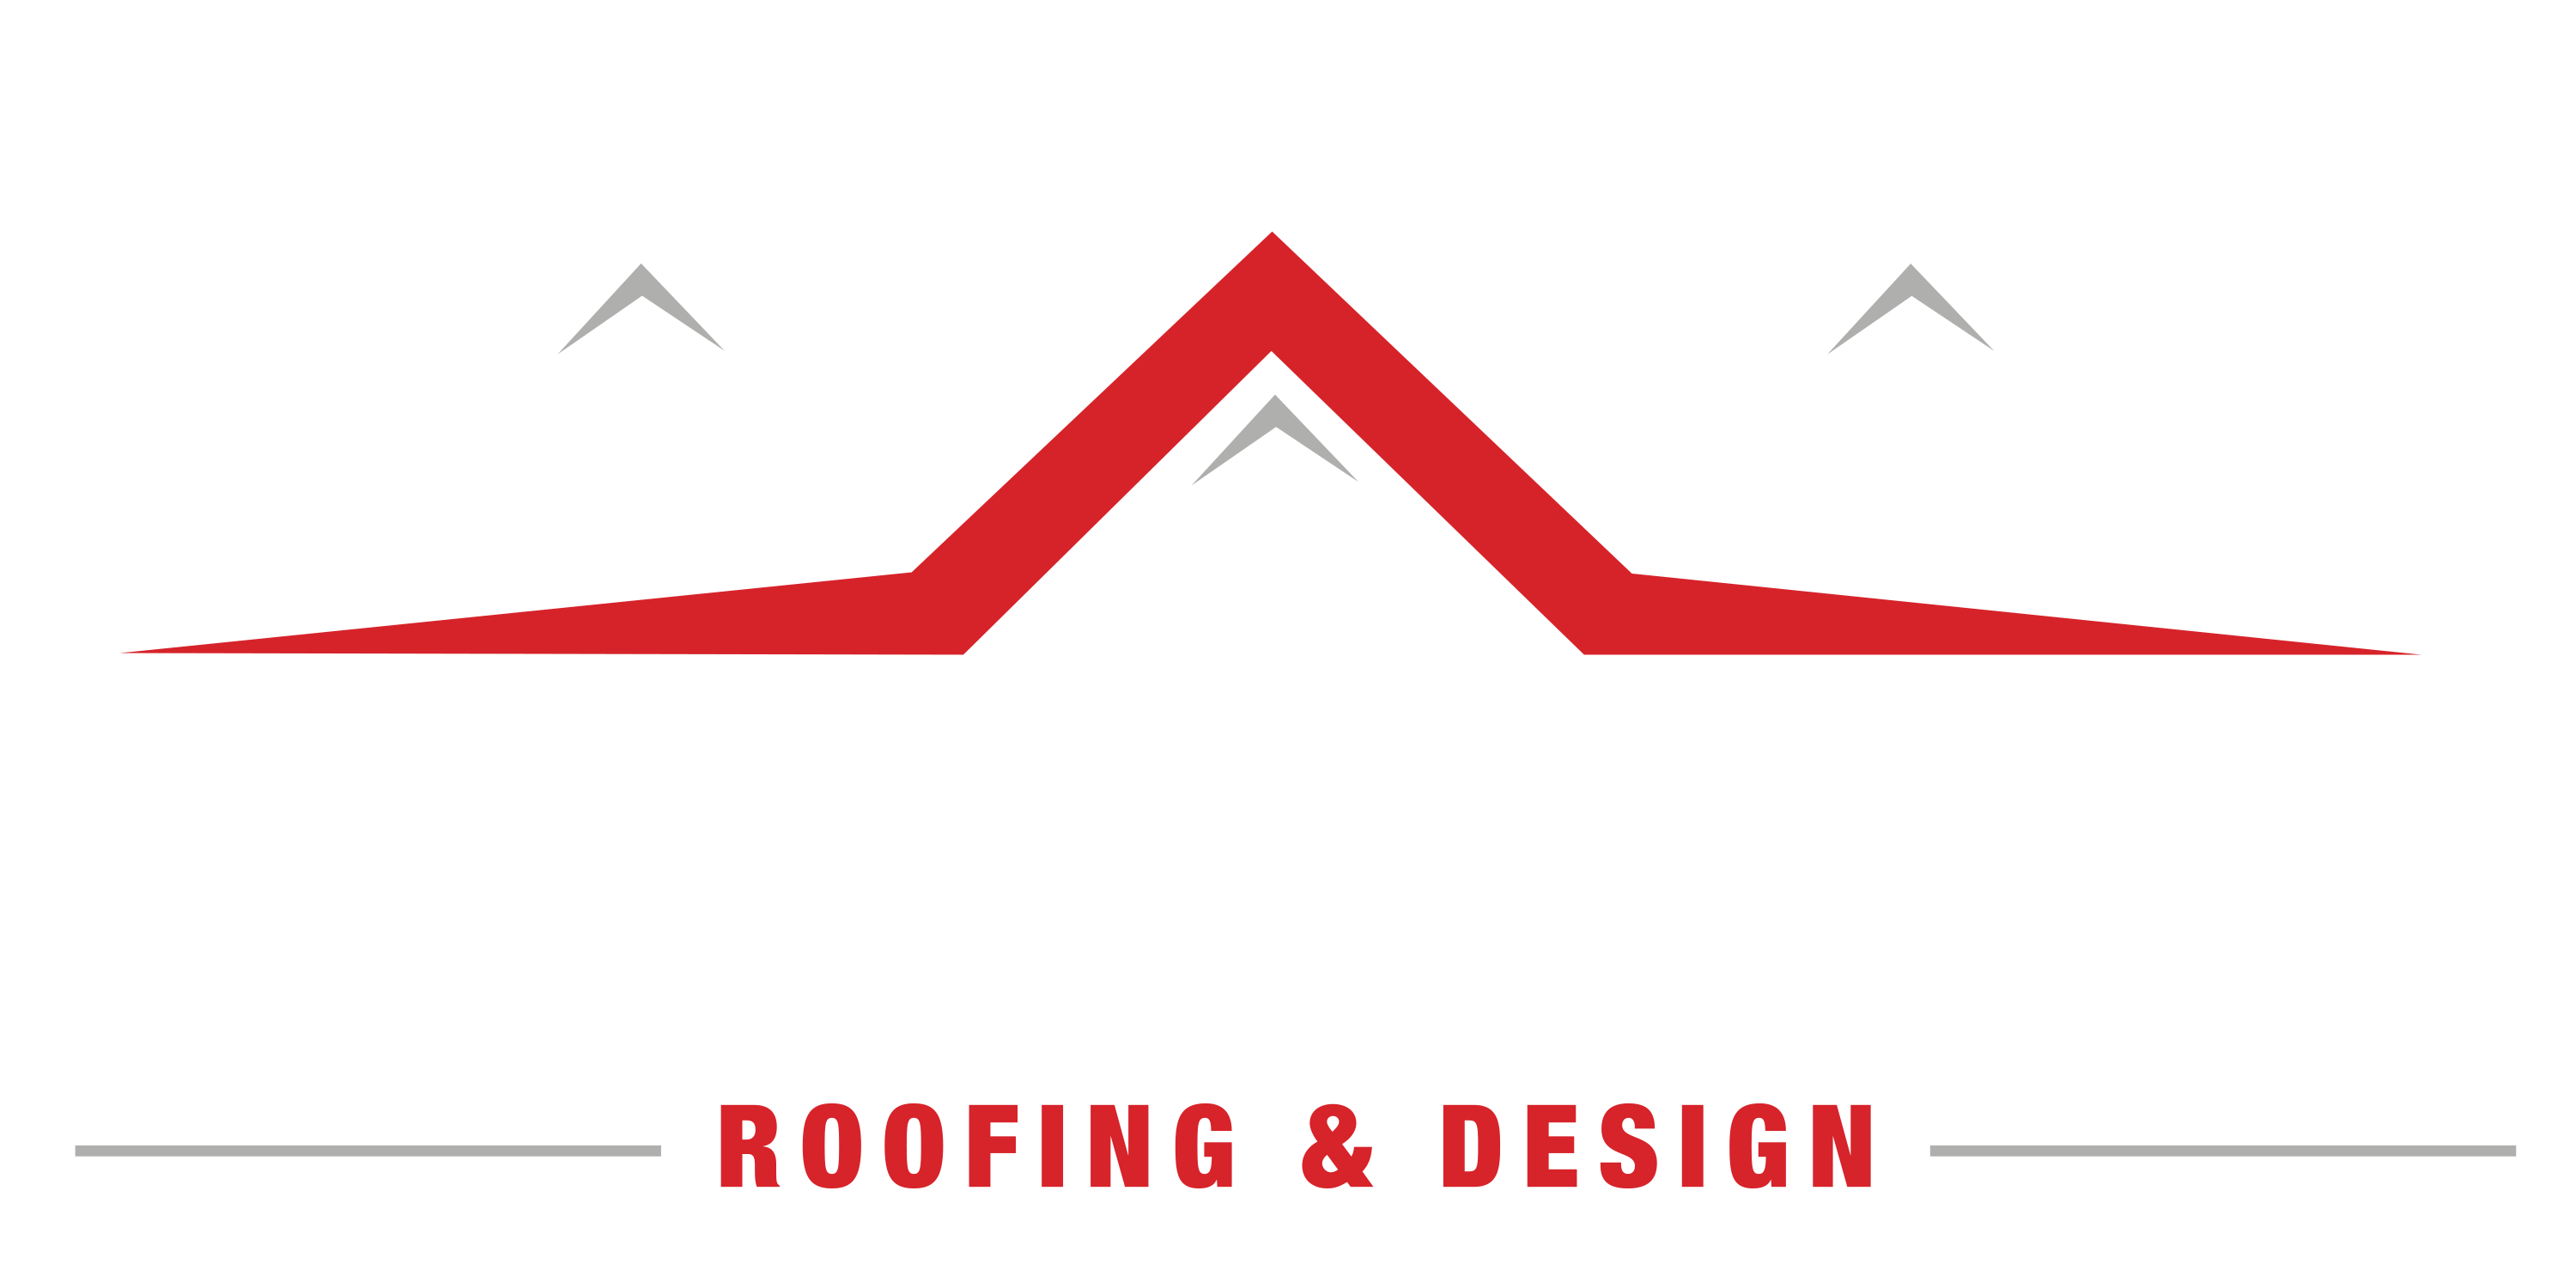 Superior Group Roofing & Design - Local Roofers